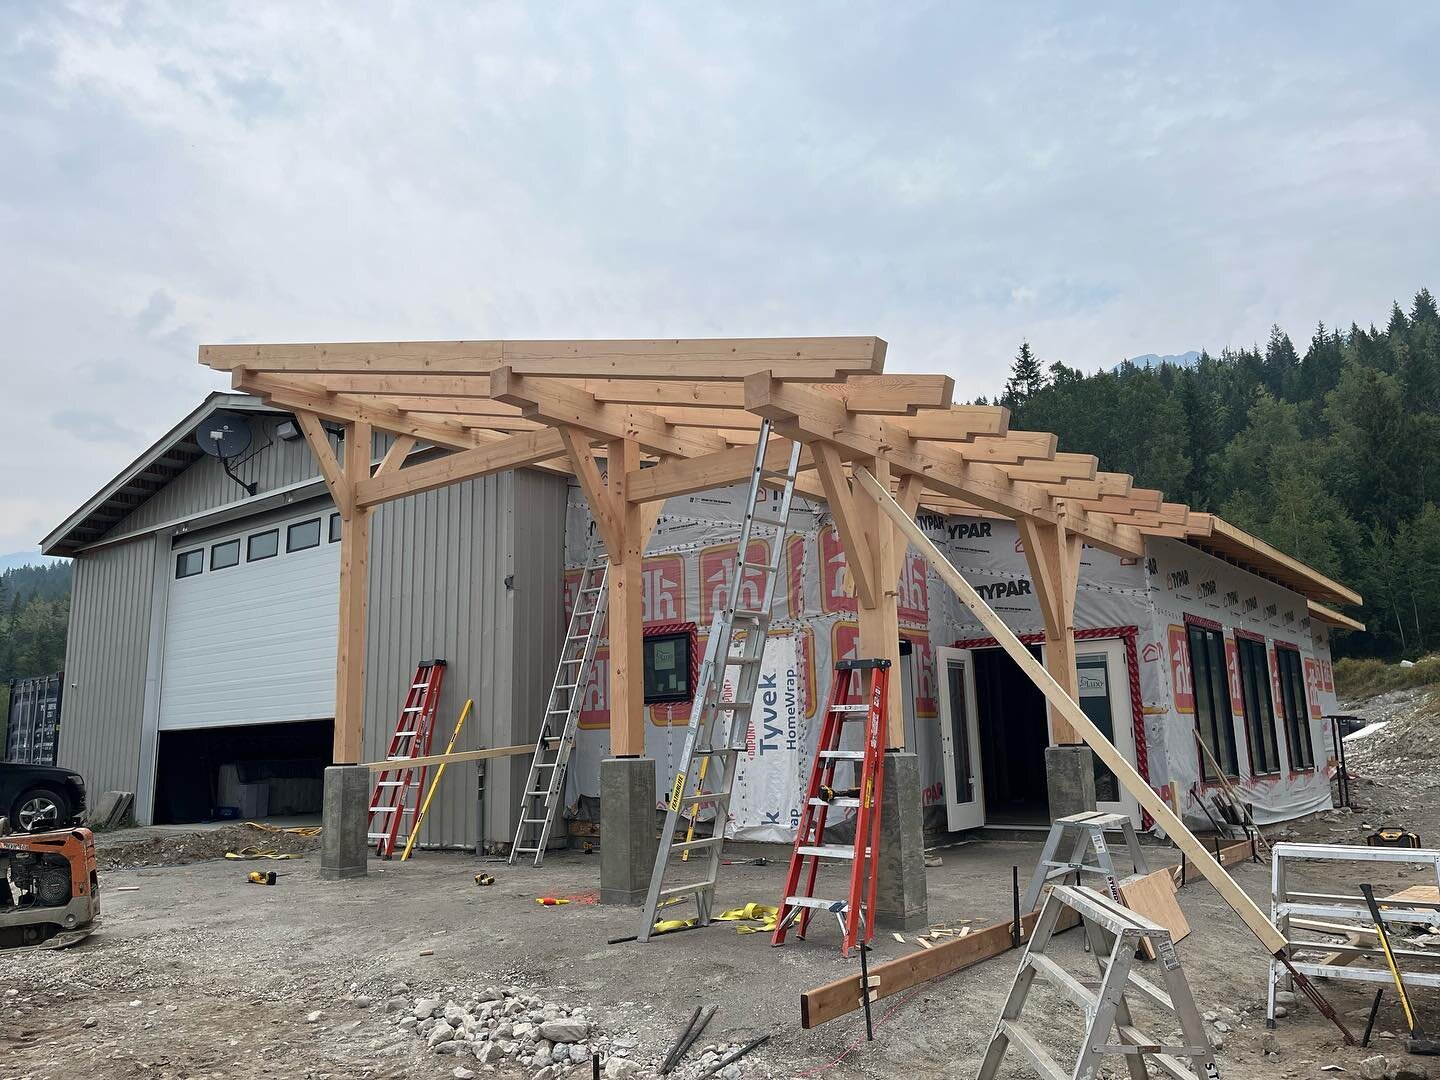 Summer has disappeared but getting @huberthaustimberframes frame stood and closed in for subs.  Where has the summer gone?  #kickinghorsemtn #goldenbc #kootenayrockies #timberframe #carpentry